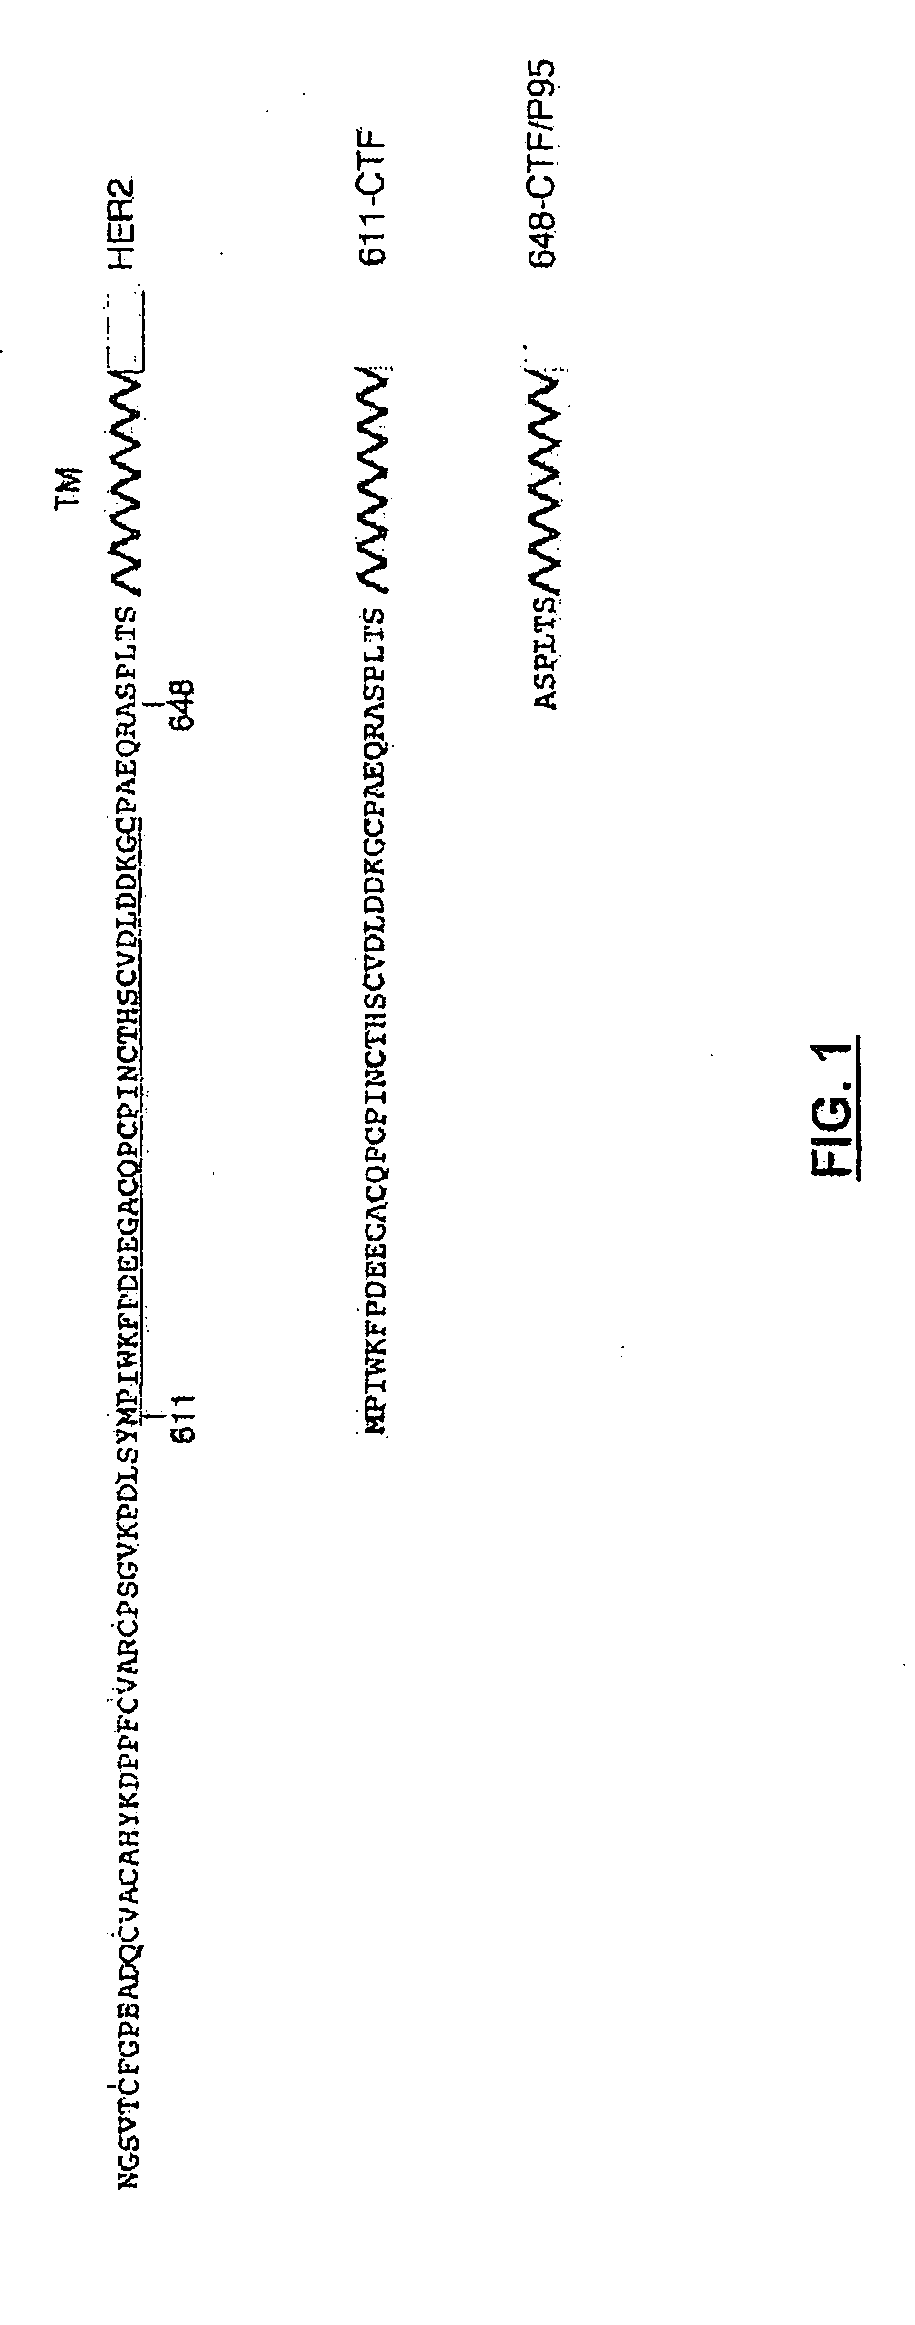 Method for Diagnosing Cancers Expressing the HER2 Receptor or its Truncated Variants